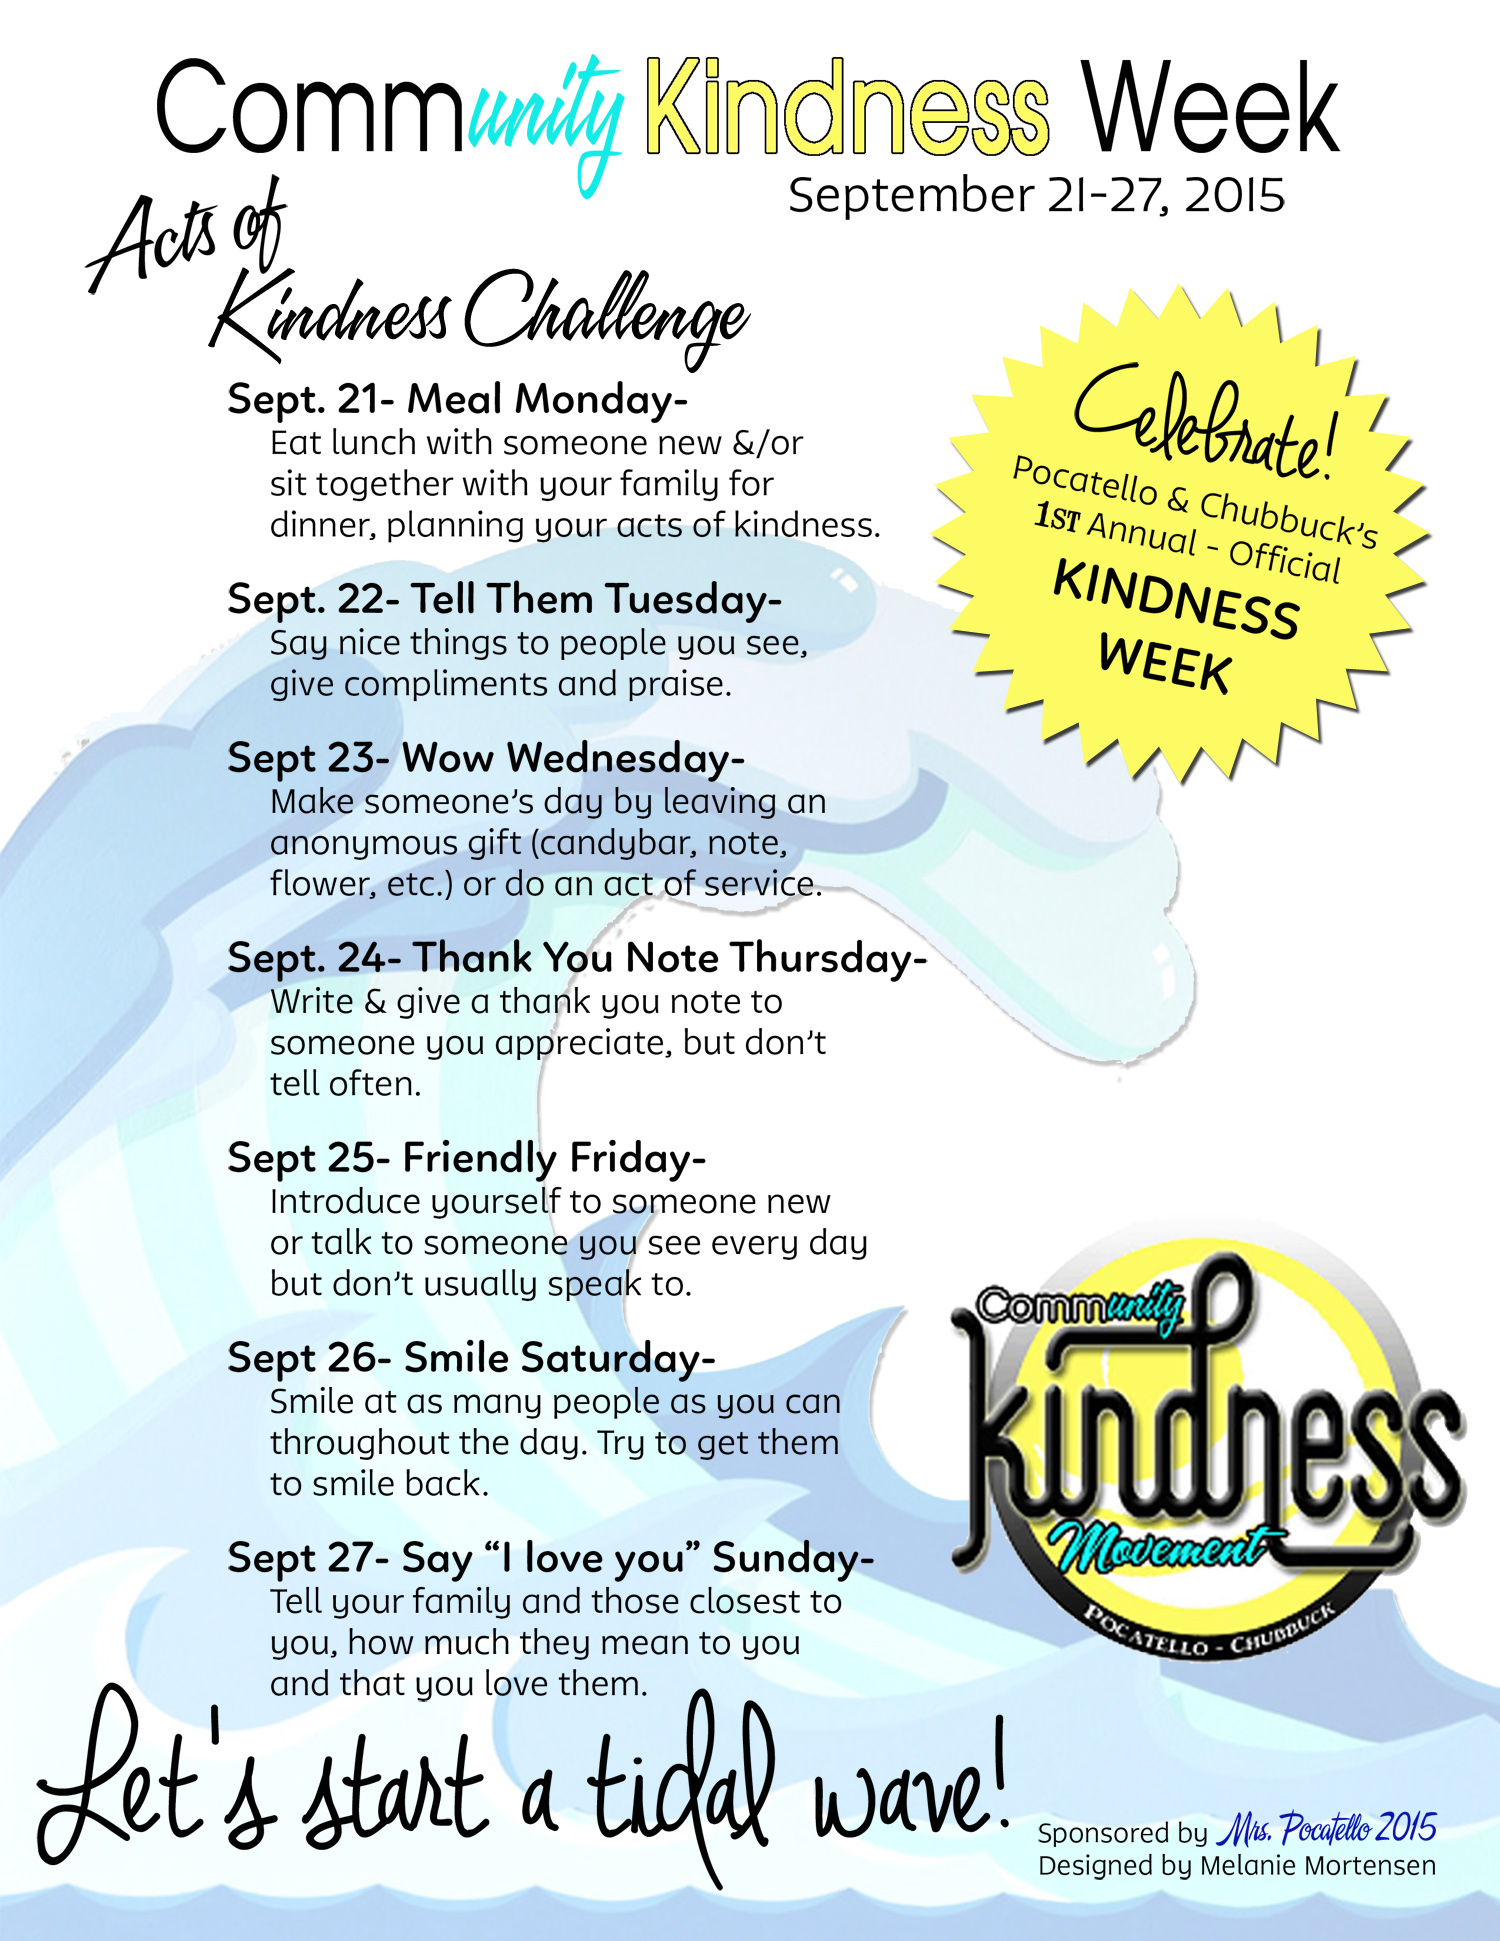 Acts of Kindness Challenge Septemer 21-27th